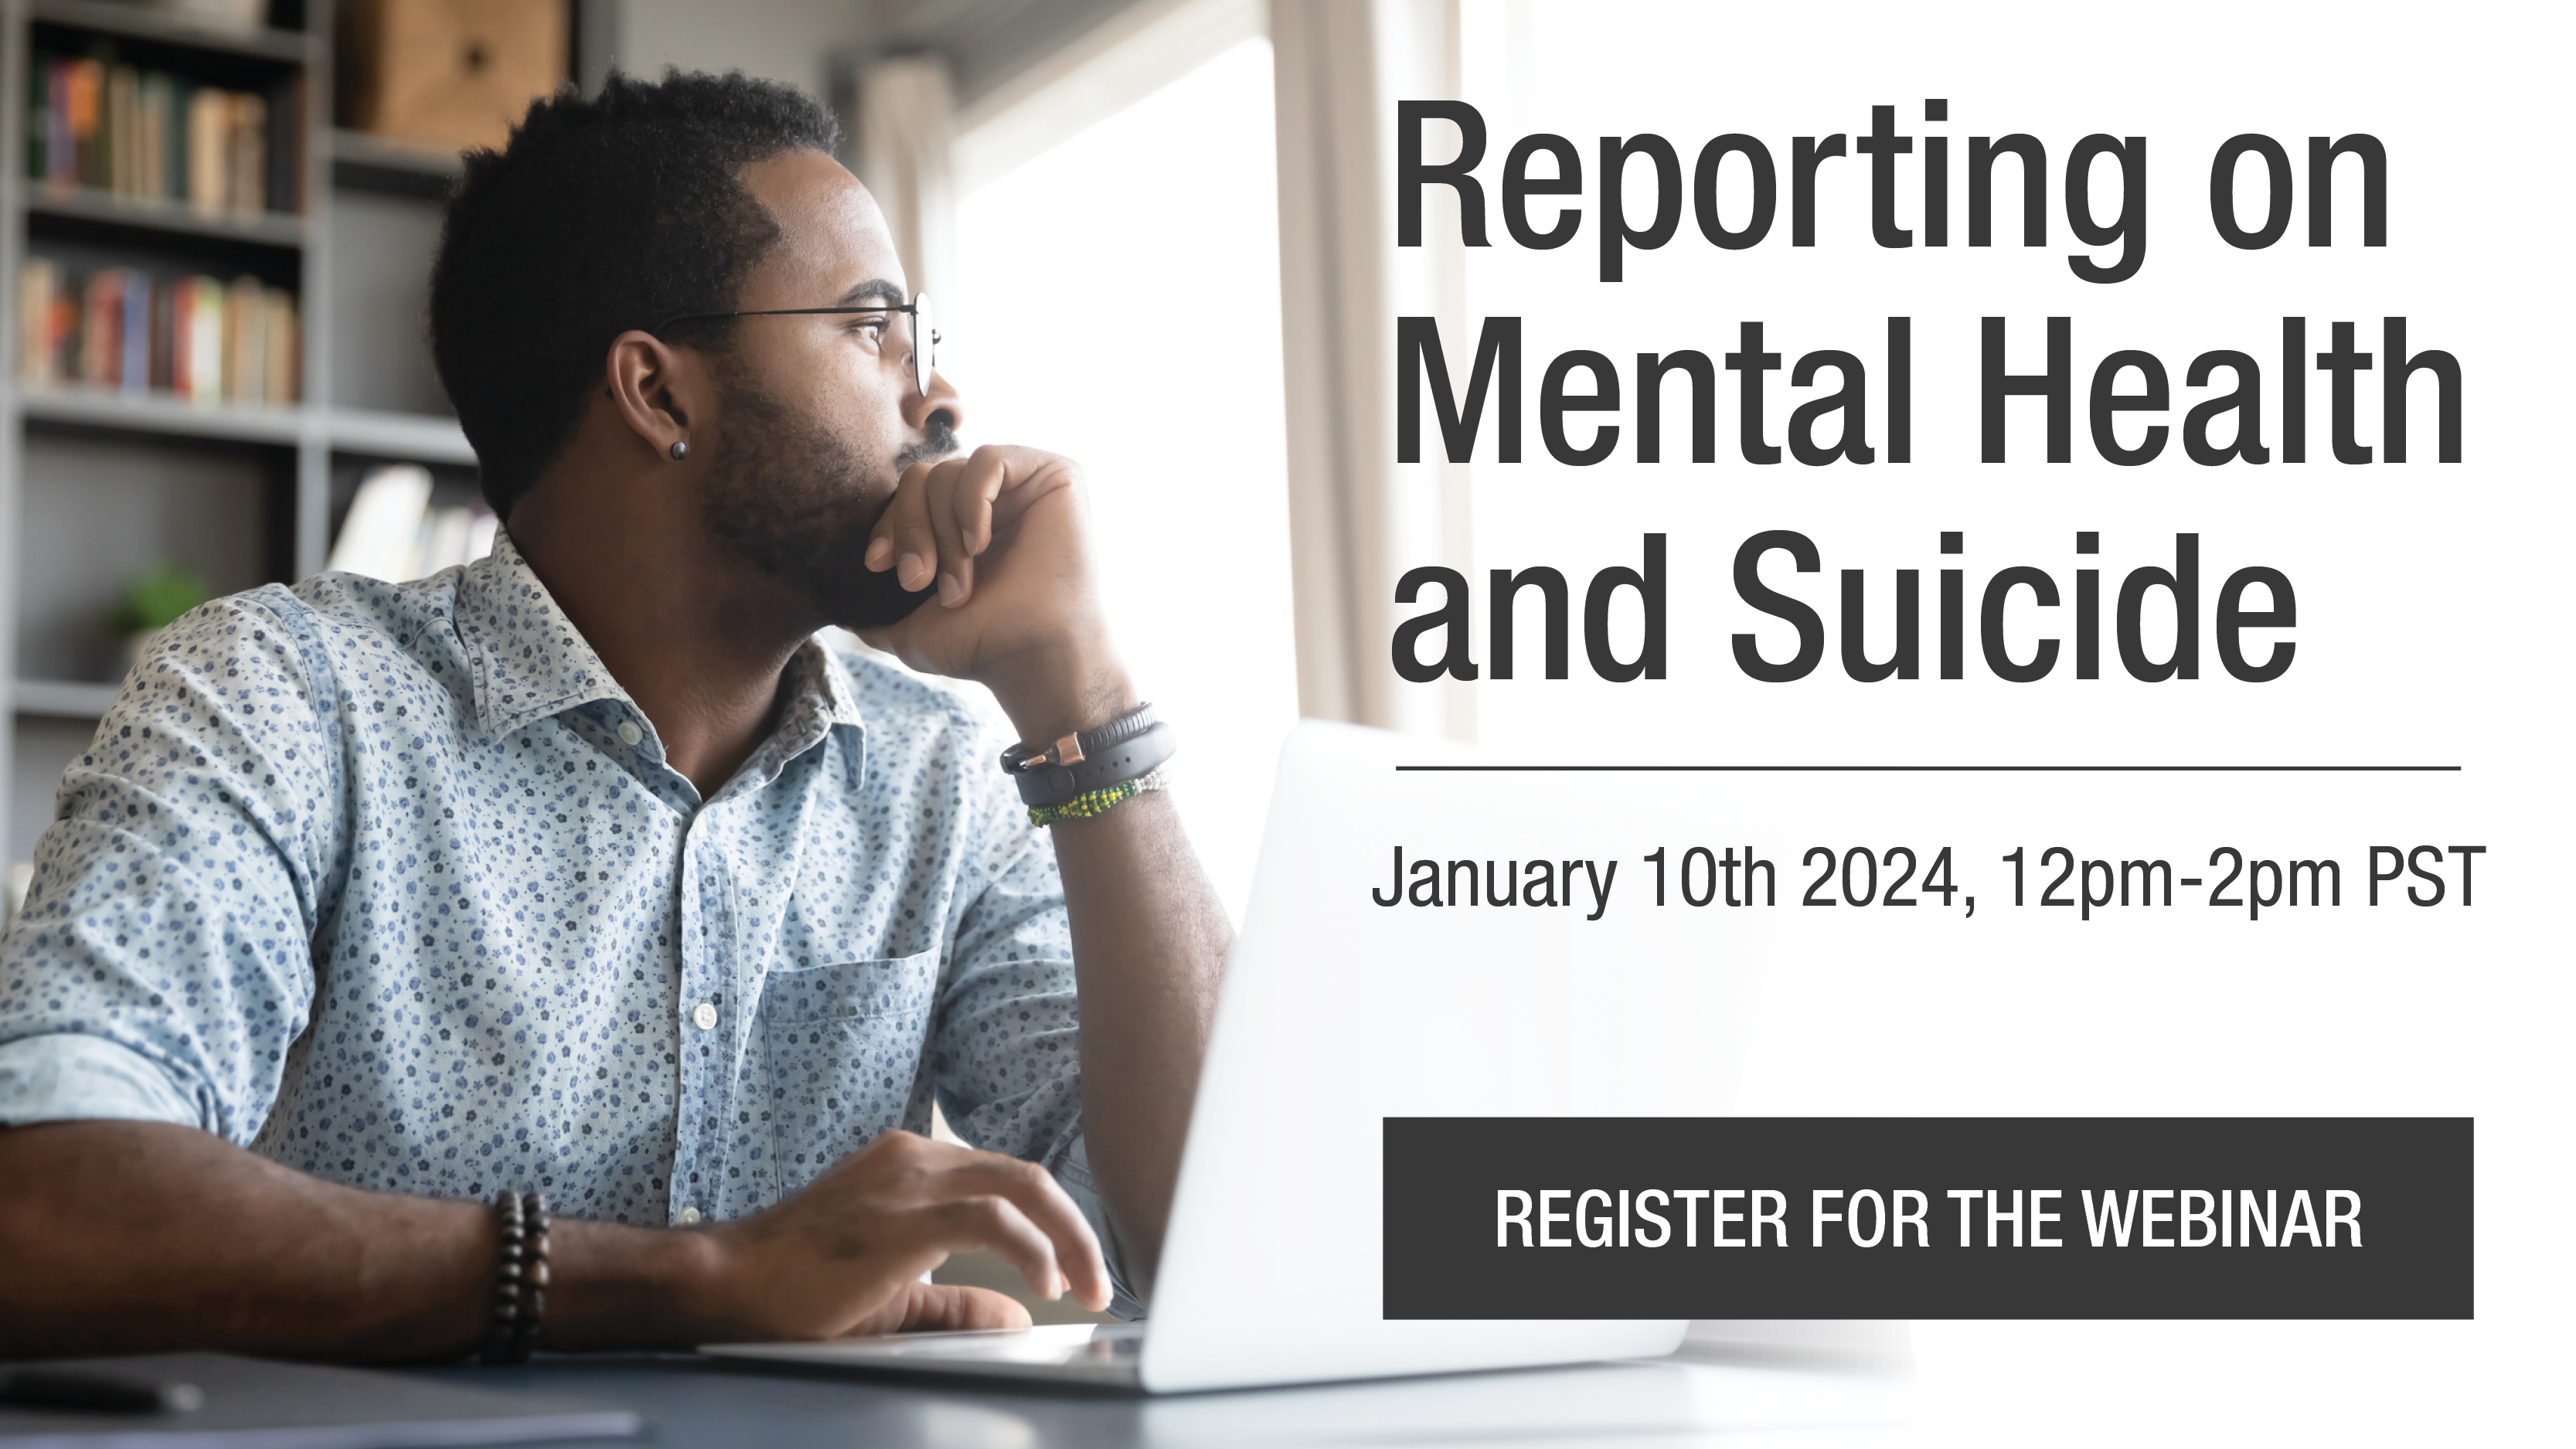 A man sits in front of a laptop wearing a light blue patterned button-up, gazing into the distance in thought. Text to the side shares the event title: "Reporting on mental health and suicide" and the date: "January 10th 2024, 12pm-2pm PST" and a call to "Register for the webinar" 